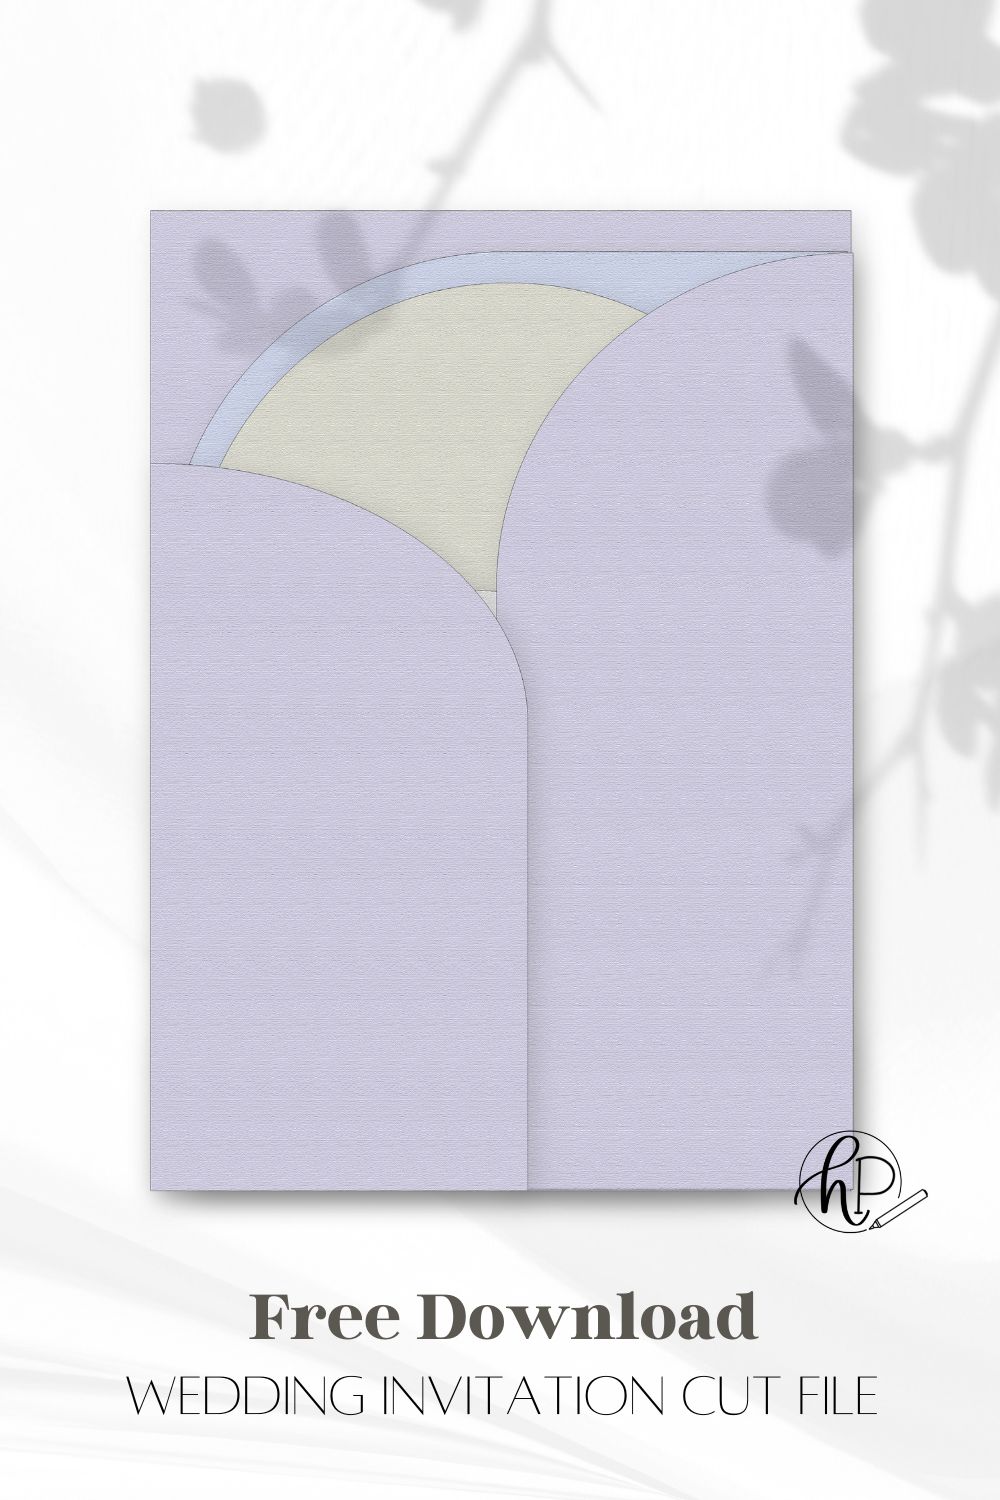 Free Download: wedding invitation cut file. image of trifold arches pocket invitation in purple, folded without text.